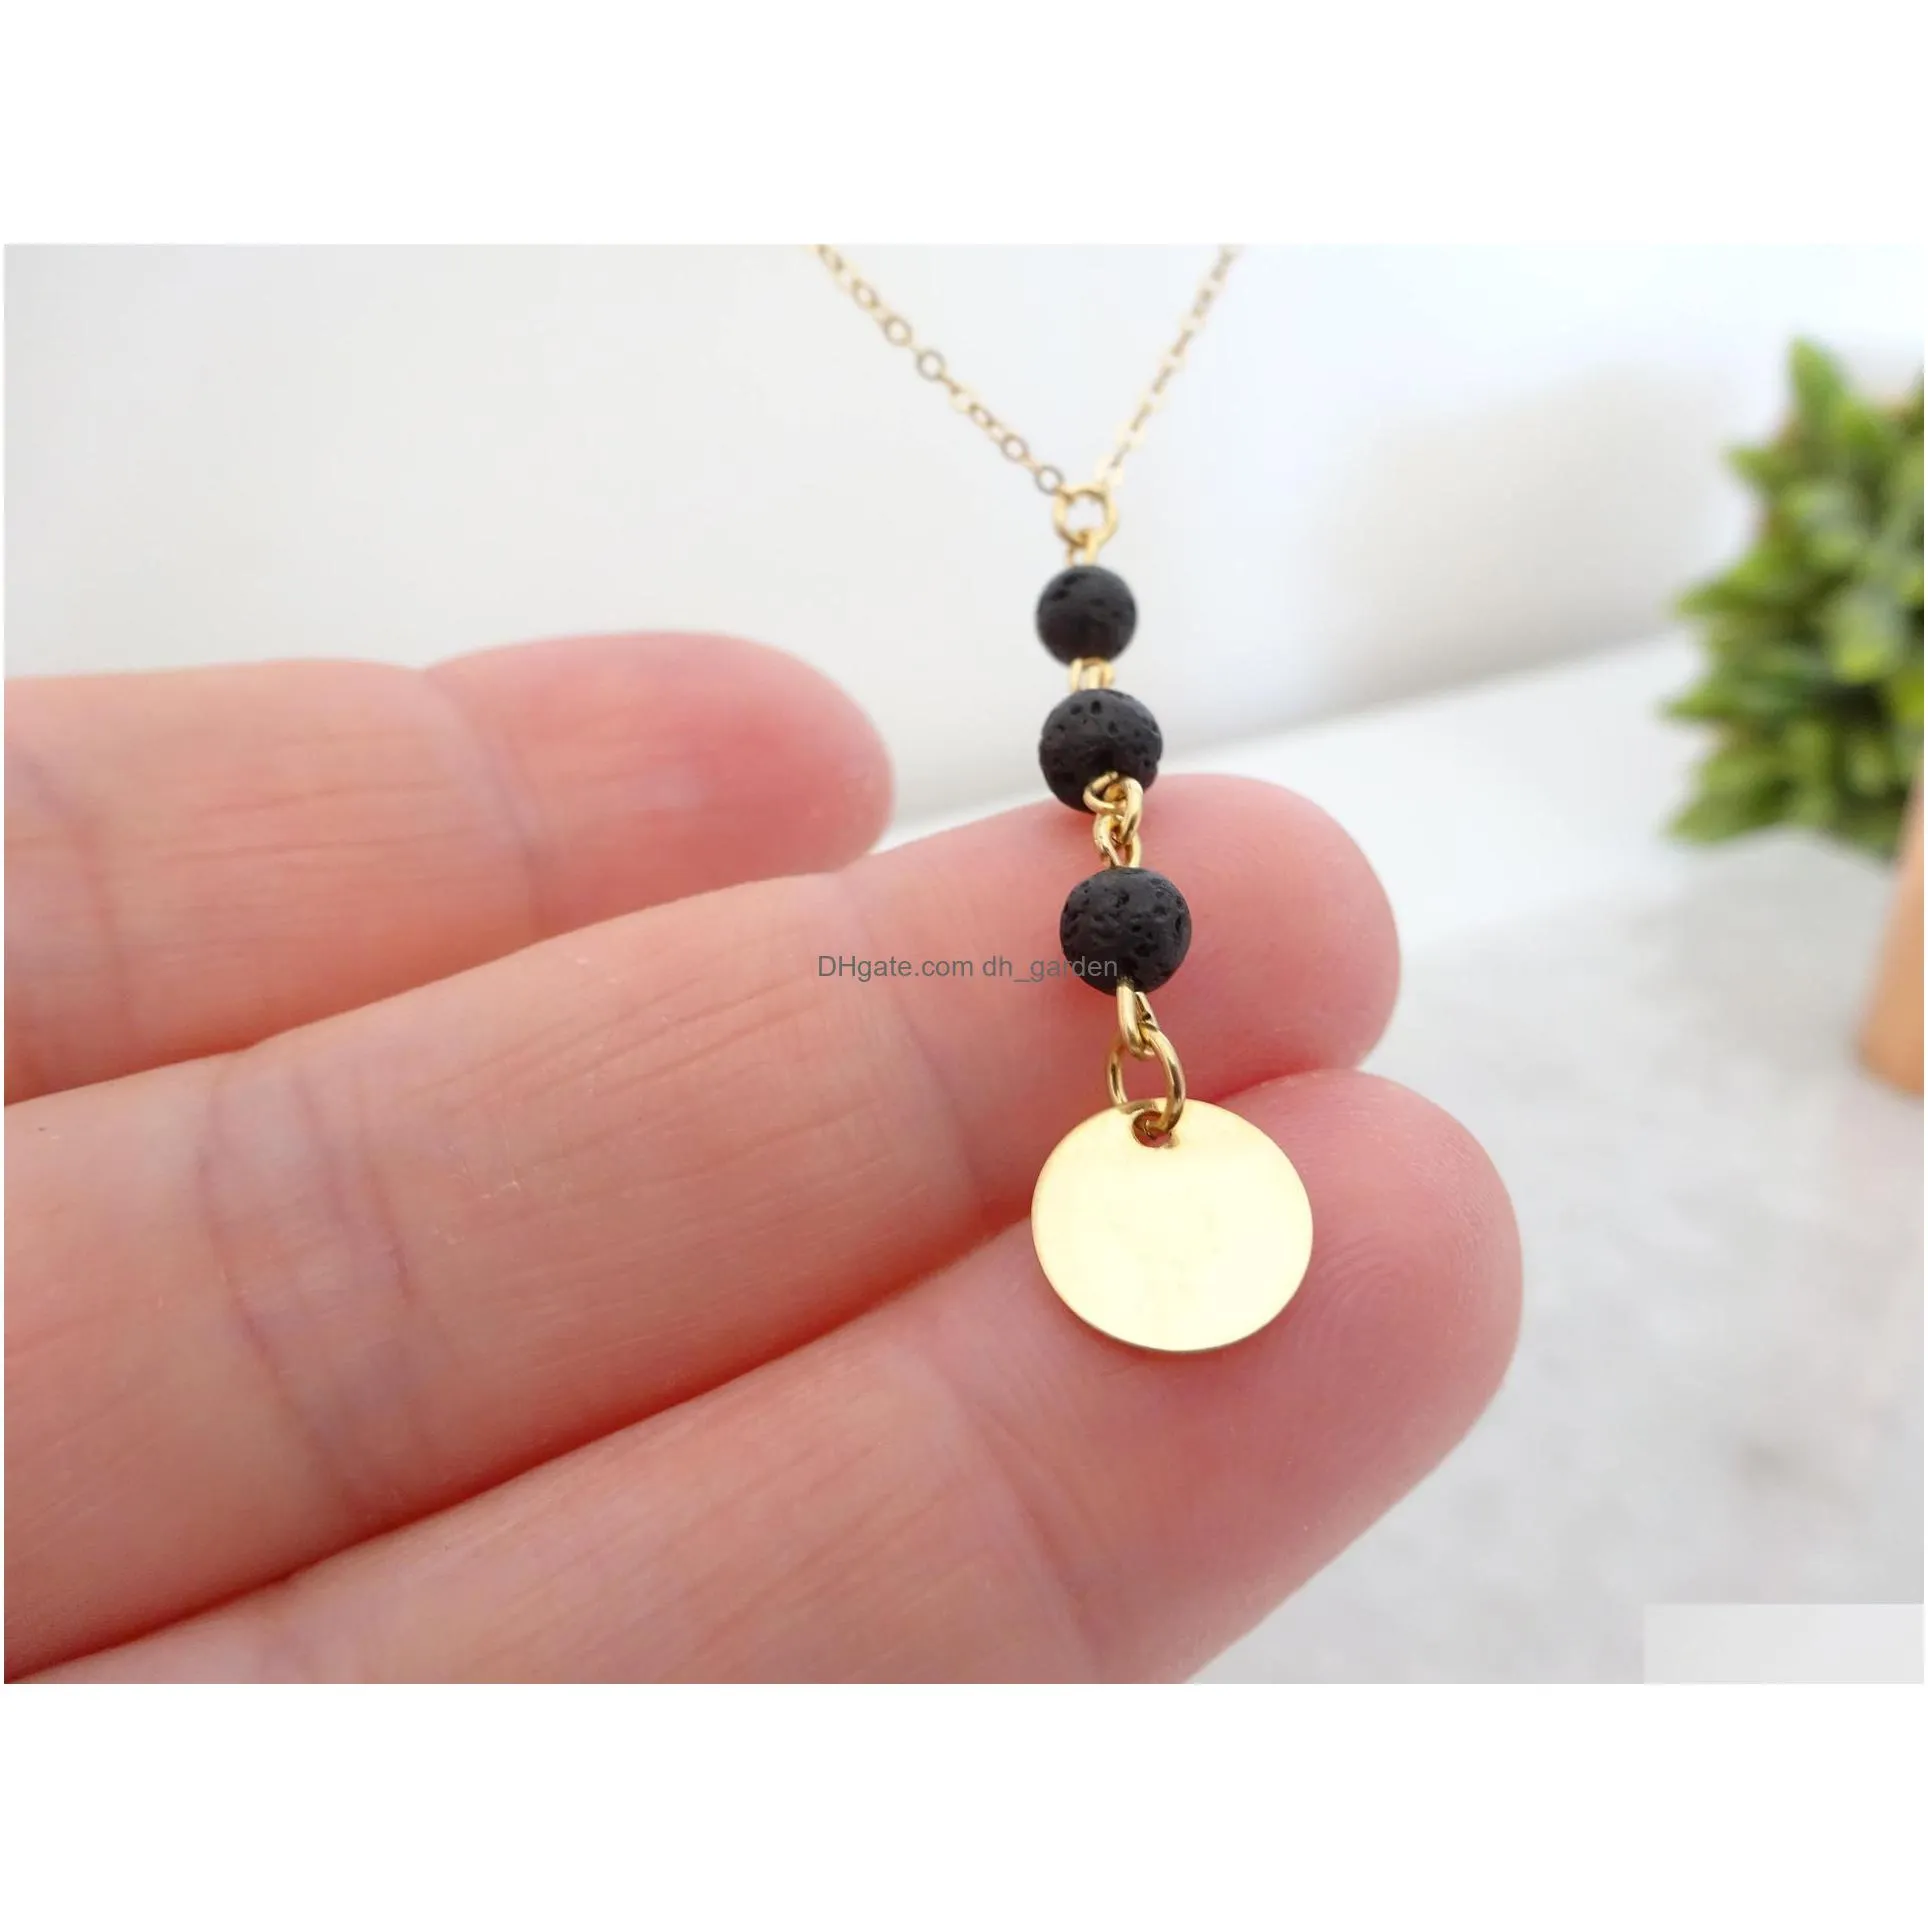 Pendant Necklaces Natural Black Lava Stone Necklace Cross Leaf Sier Gold Color Heart Aromatherapy  Oil Diffuser For Dhgarden Dhedq